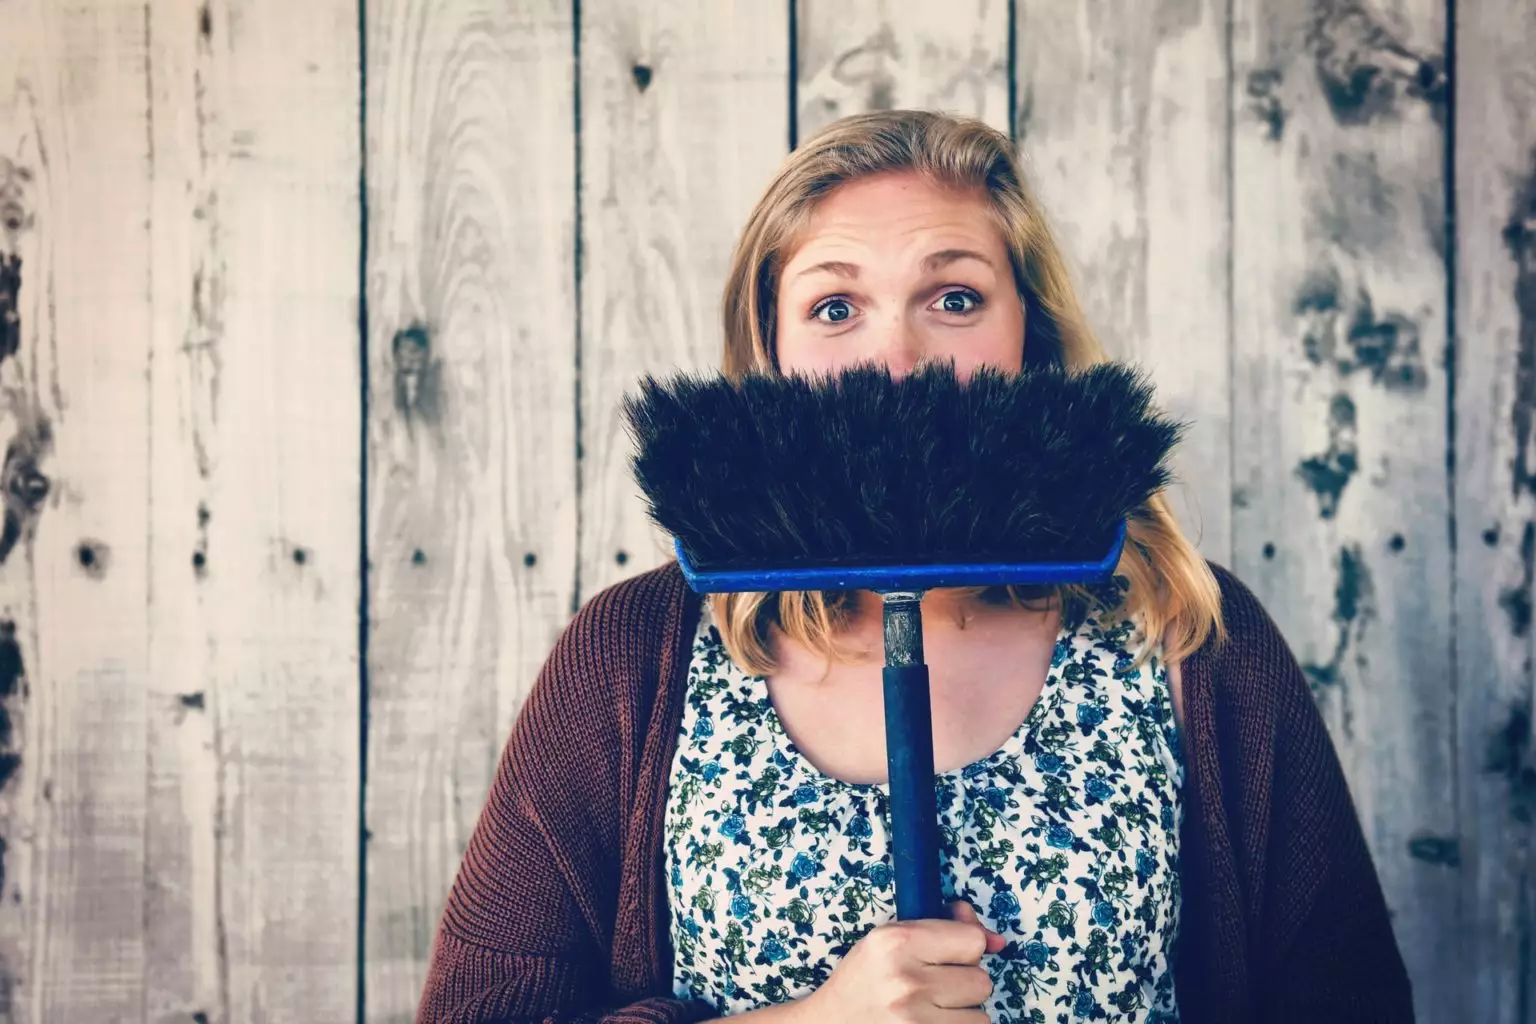 Woman holding broom upside down and hiding her teeth